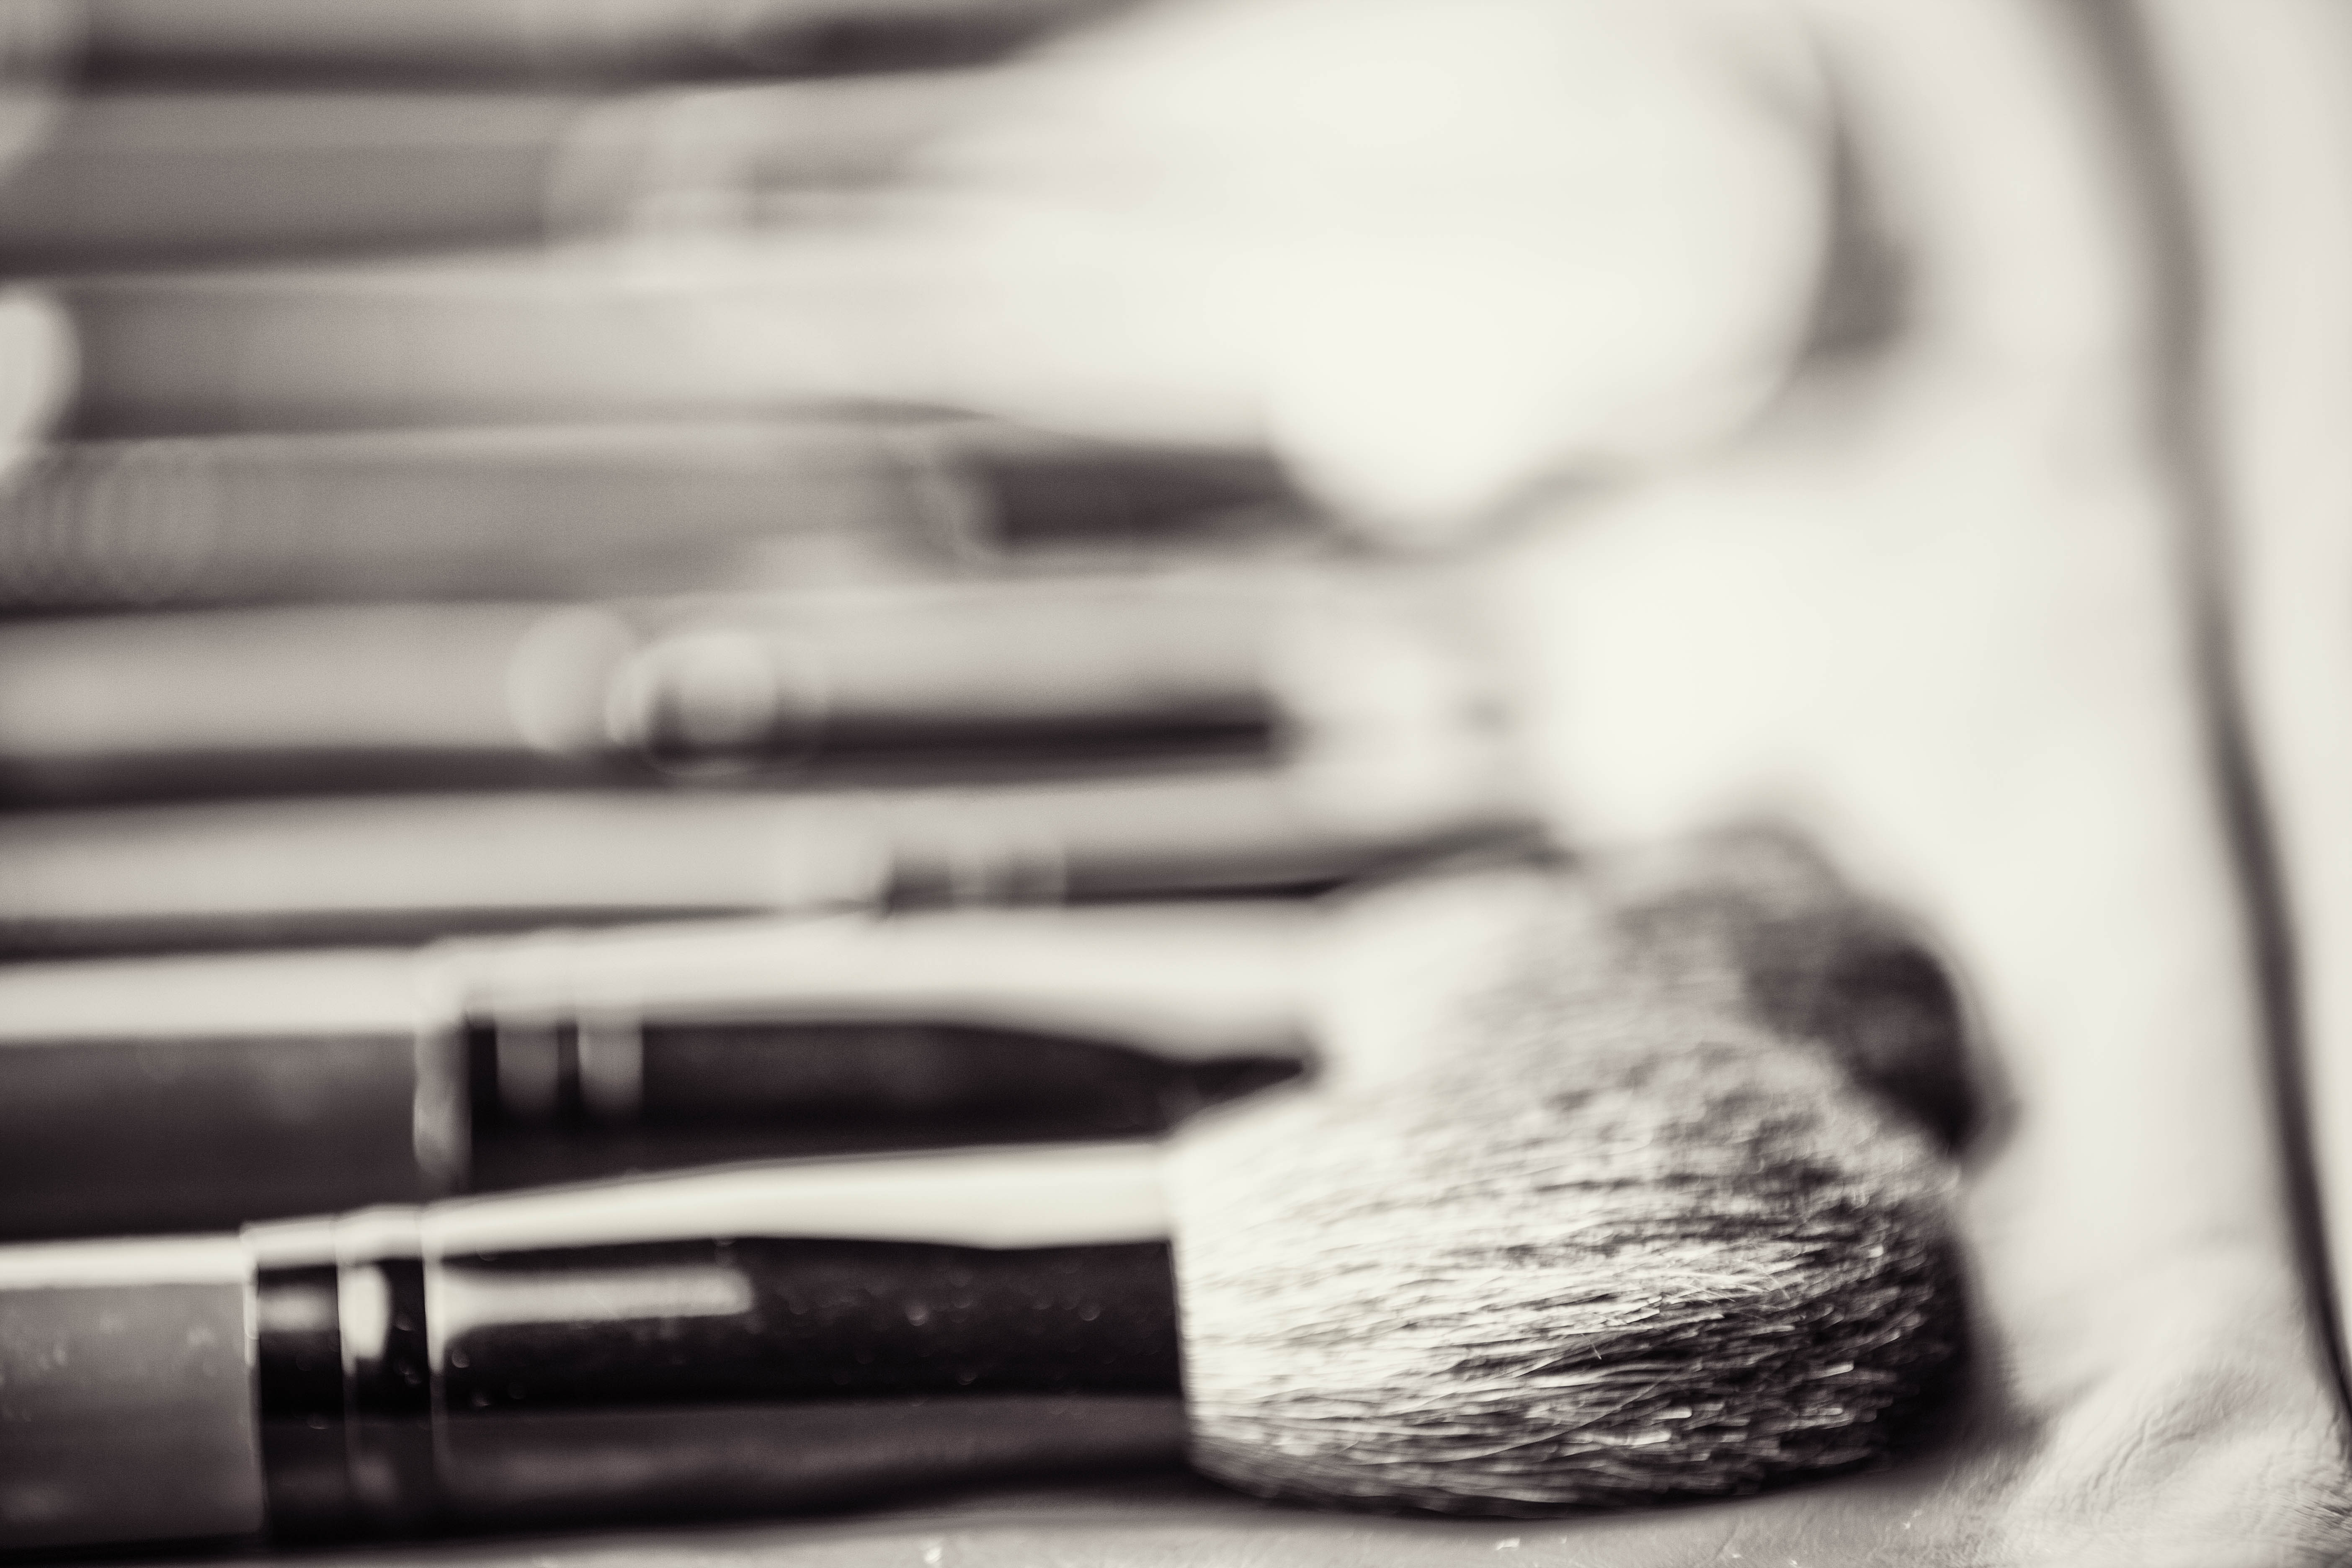 Day 207: Makeup Brushes